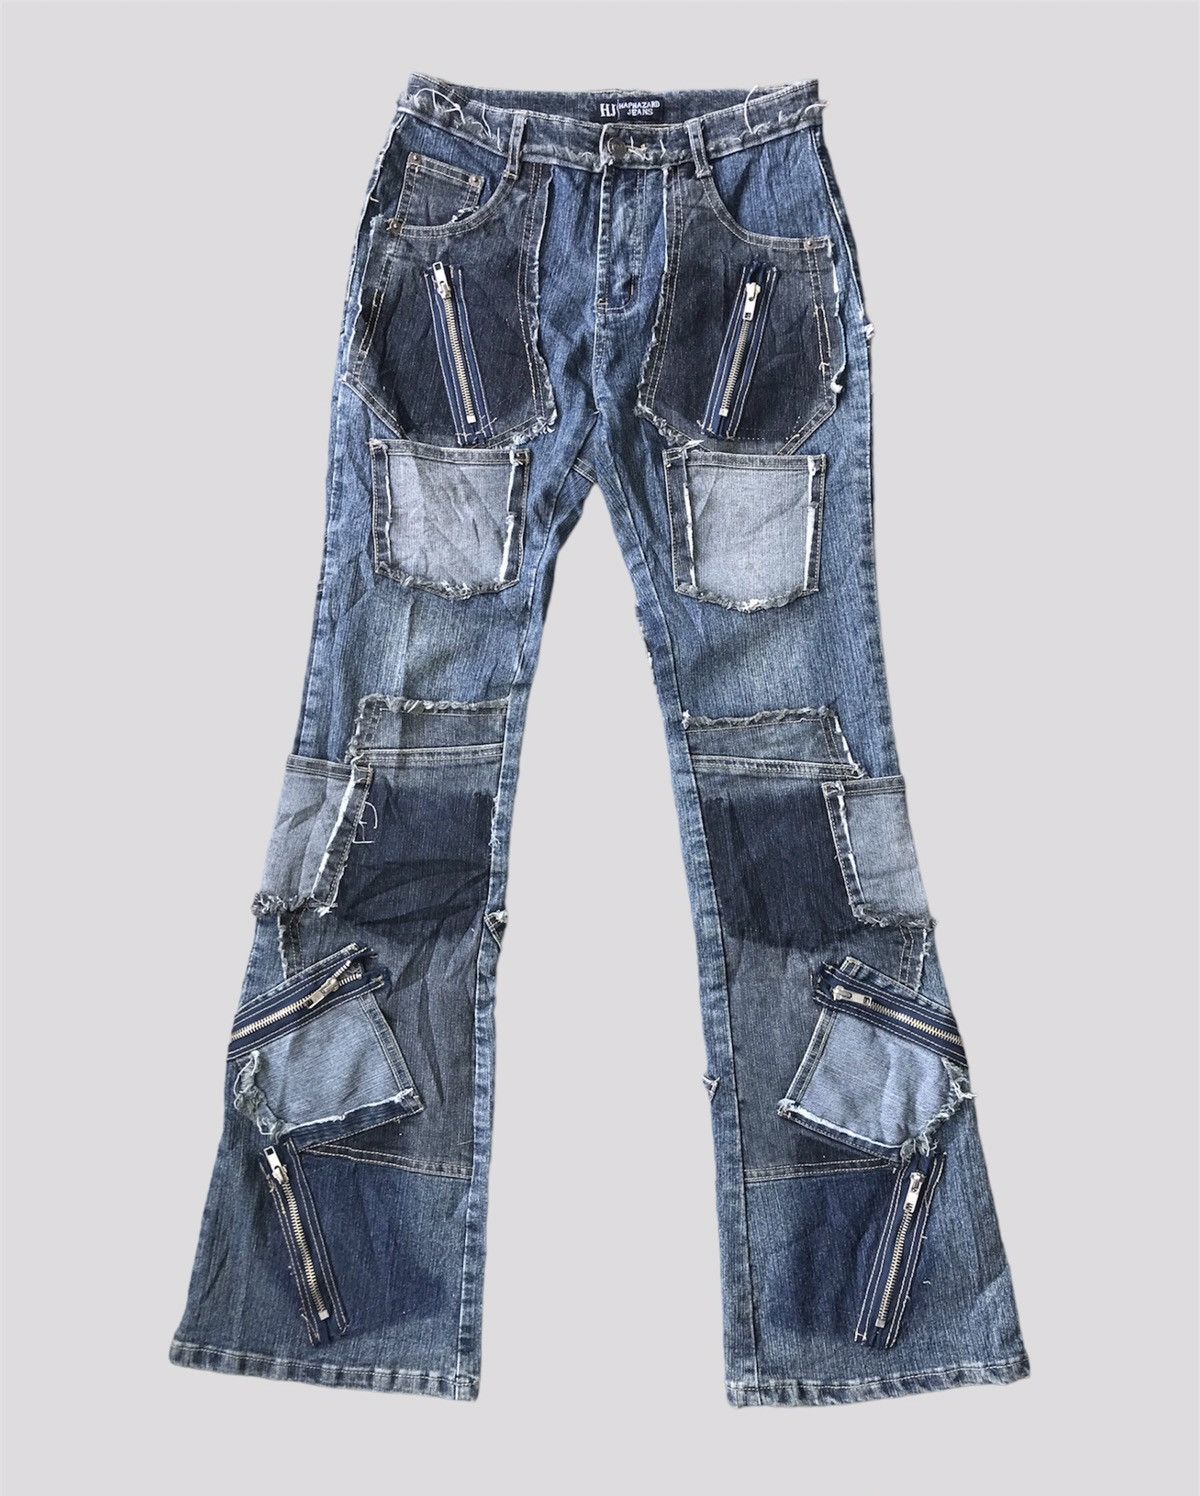 Hysteric Glamour Flare Jean Patchwork Zip Pants Style By Haphazard ...